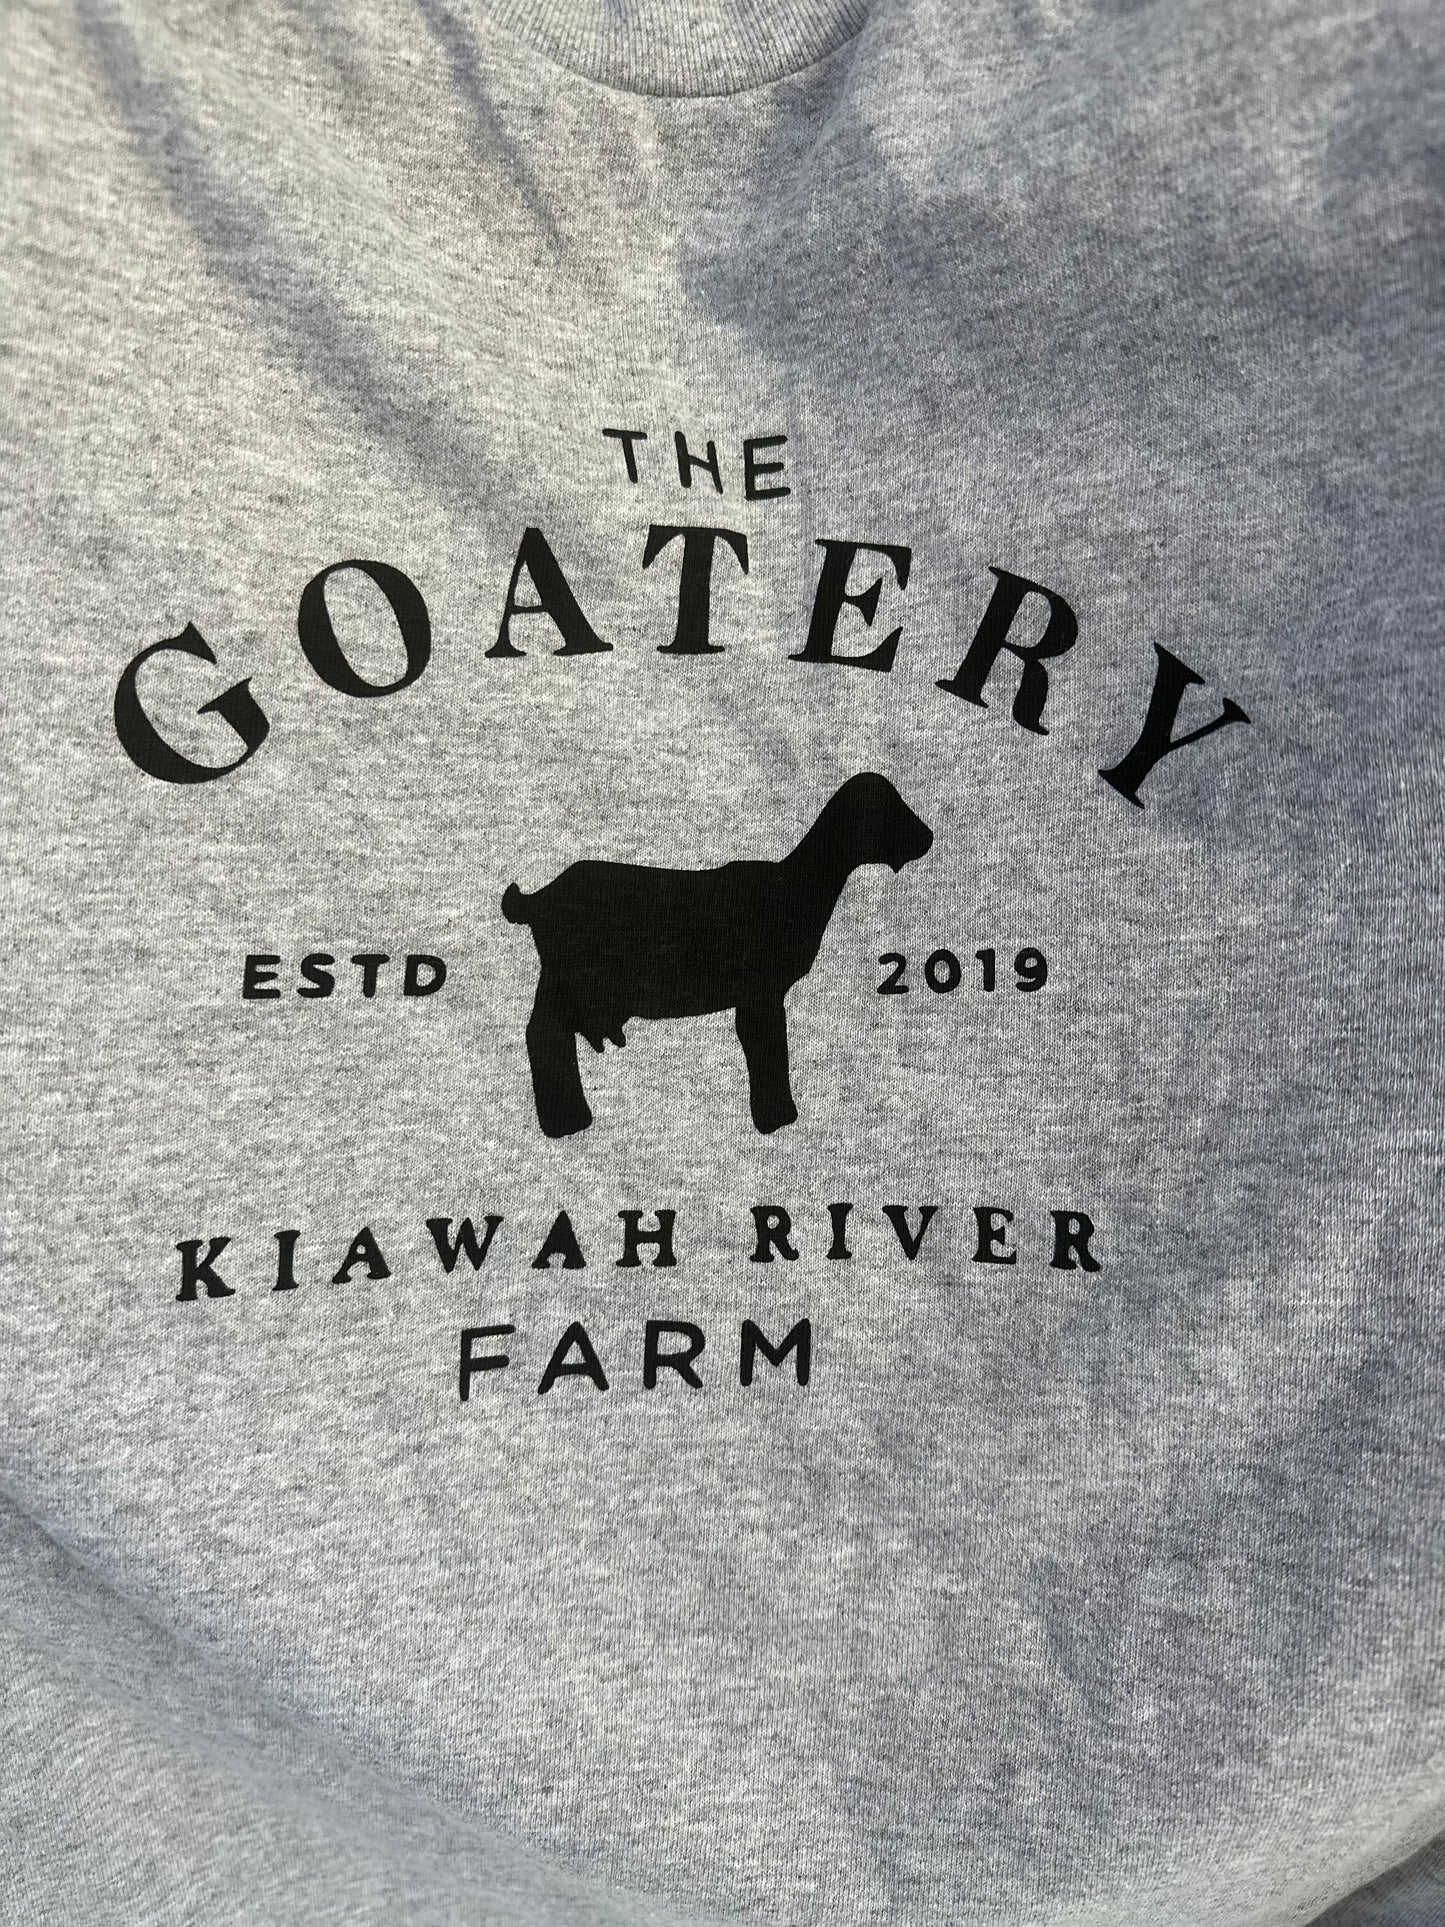 The Goatery at Kiawah River T-Shirt (youth and adult sizes available).